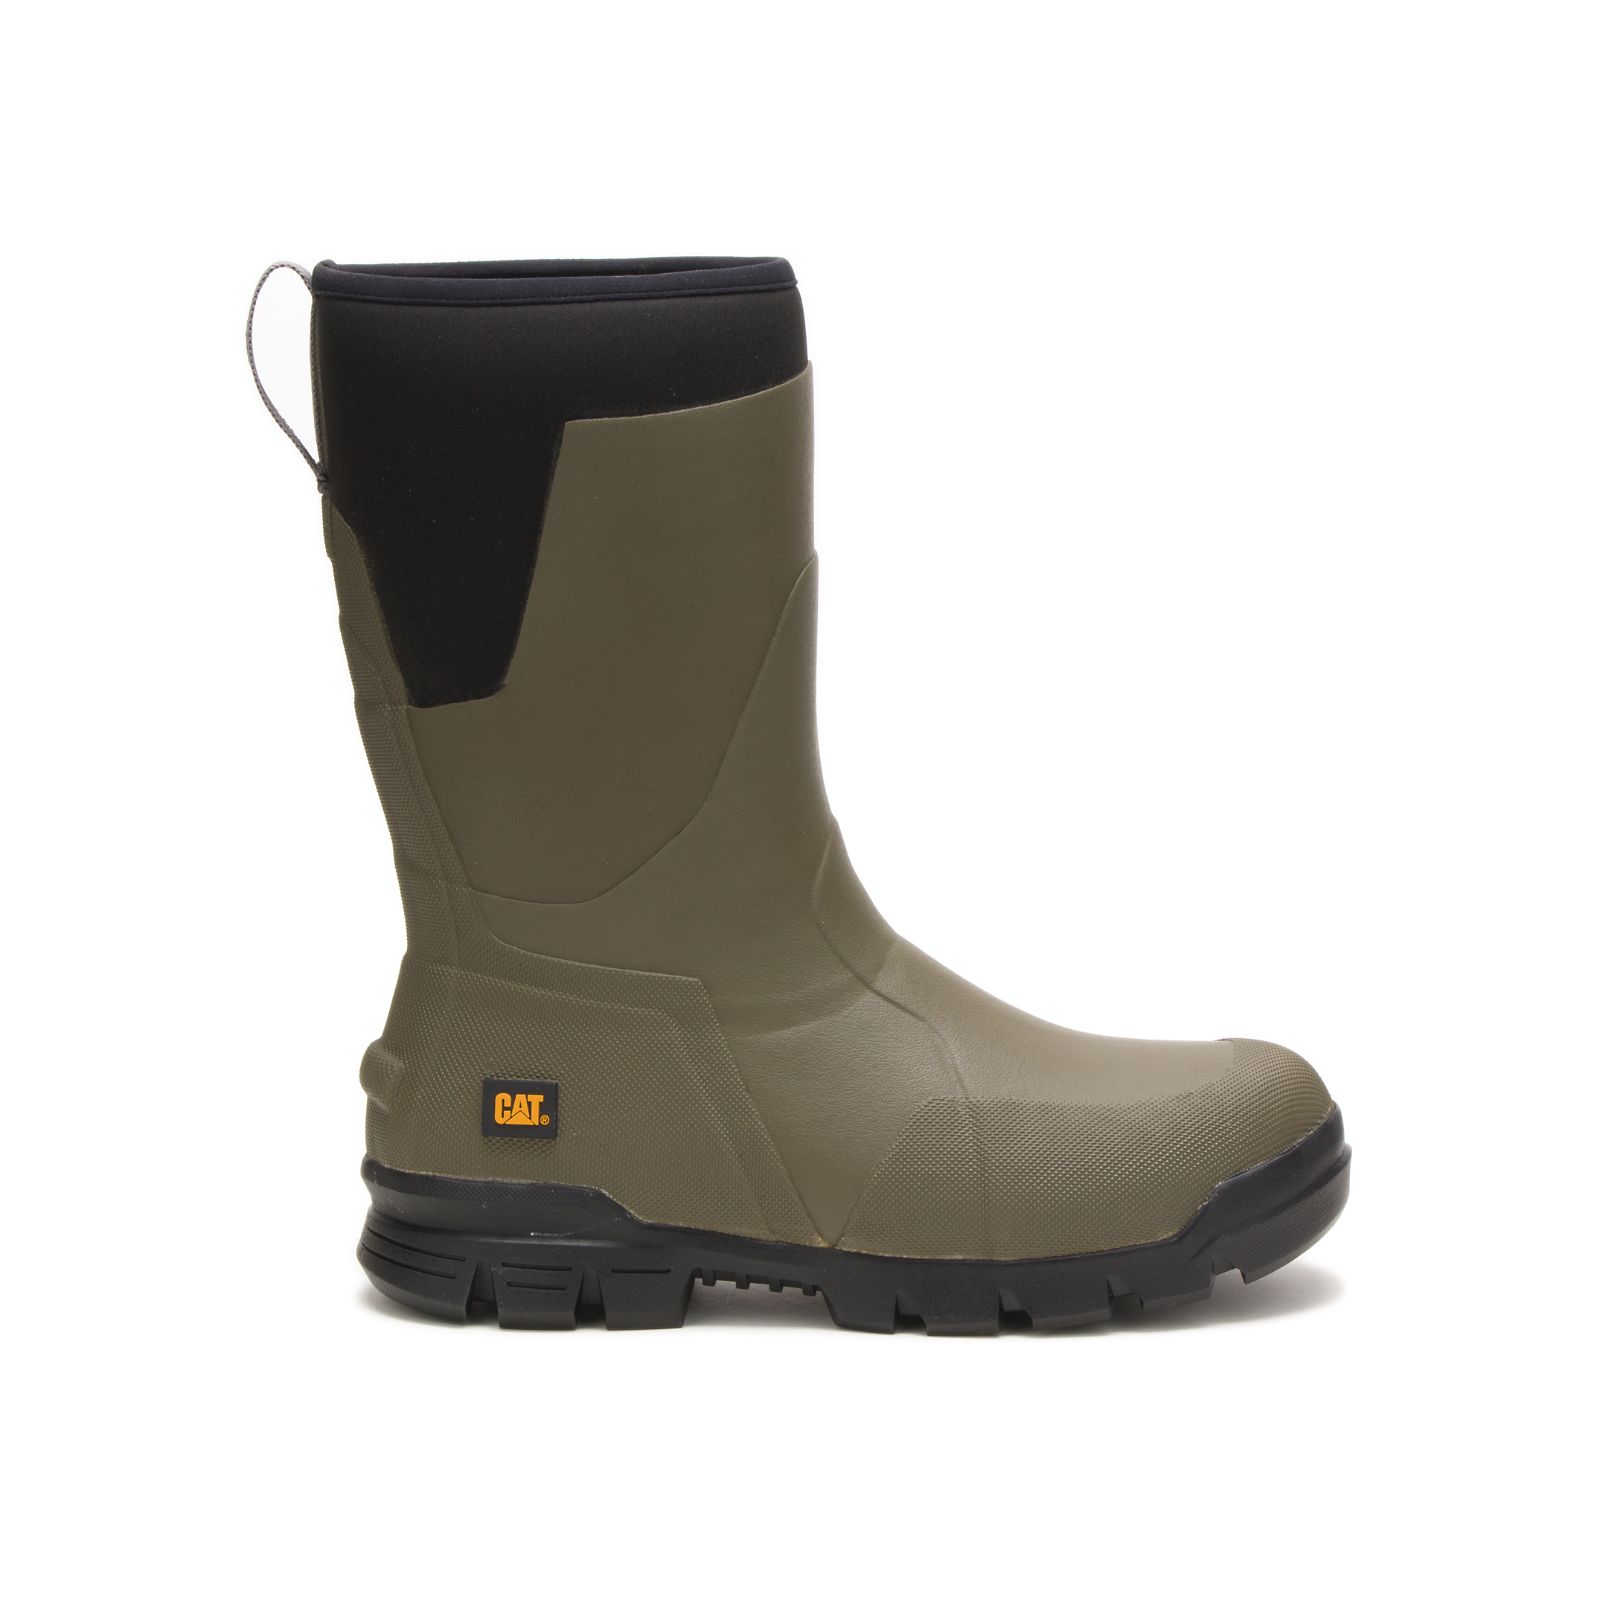 Caterpillar Boots Lahore - Caterpillar Stormers 11" Womens Rubber Boots Olive (437651-RCS)